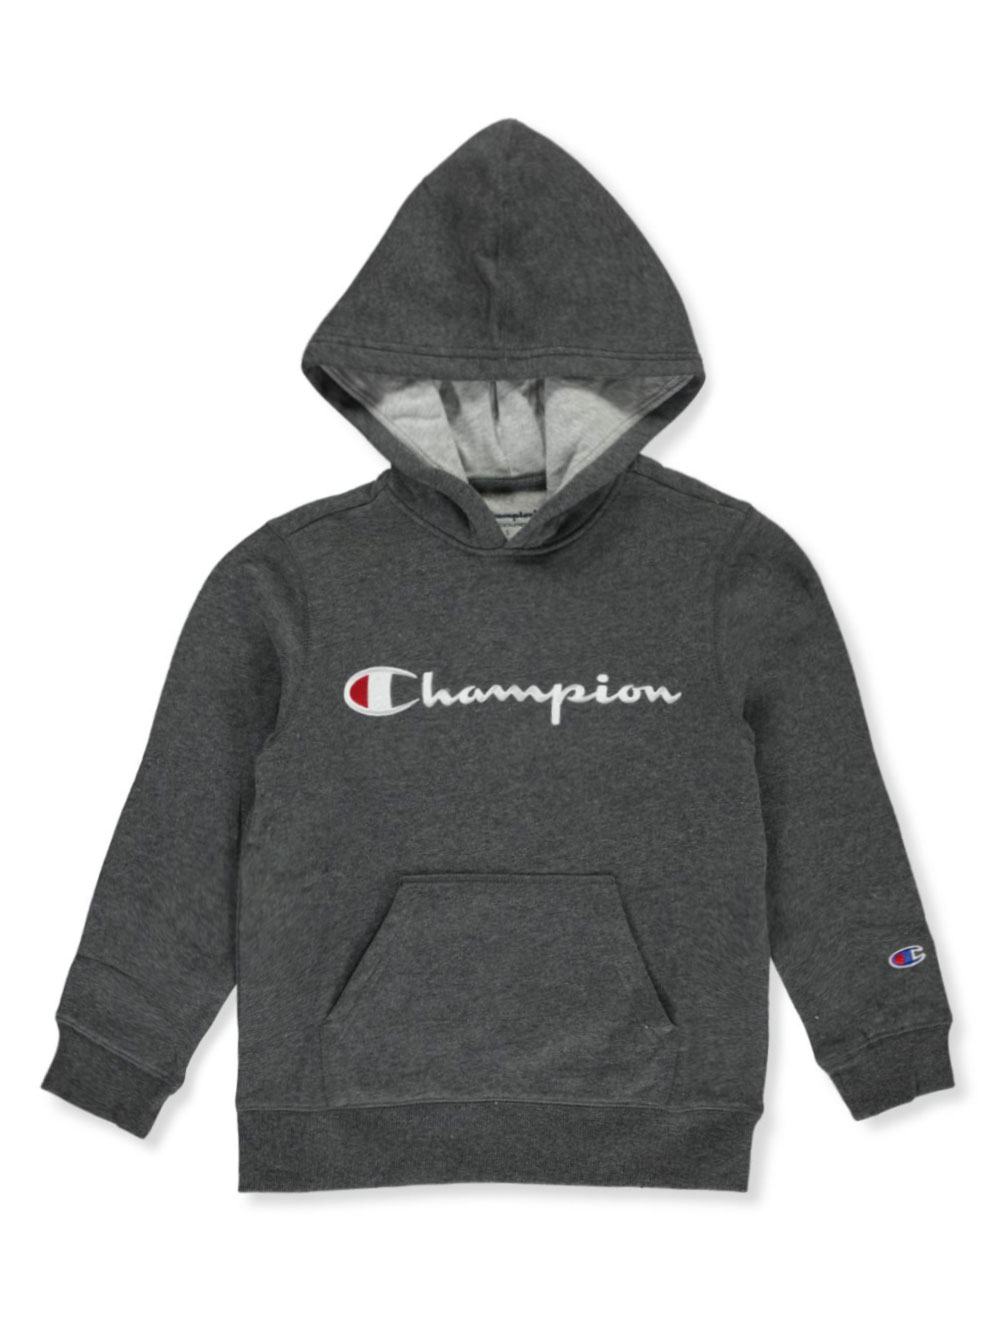 champion hoodie black and gold